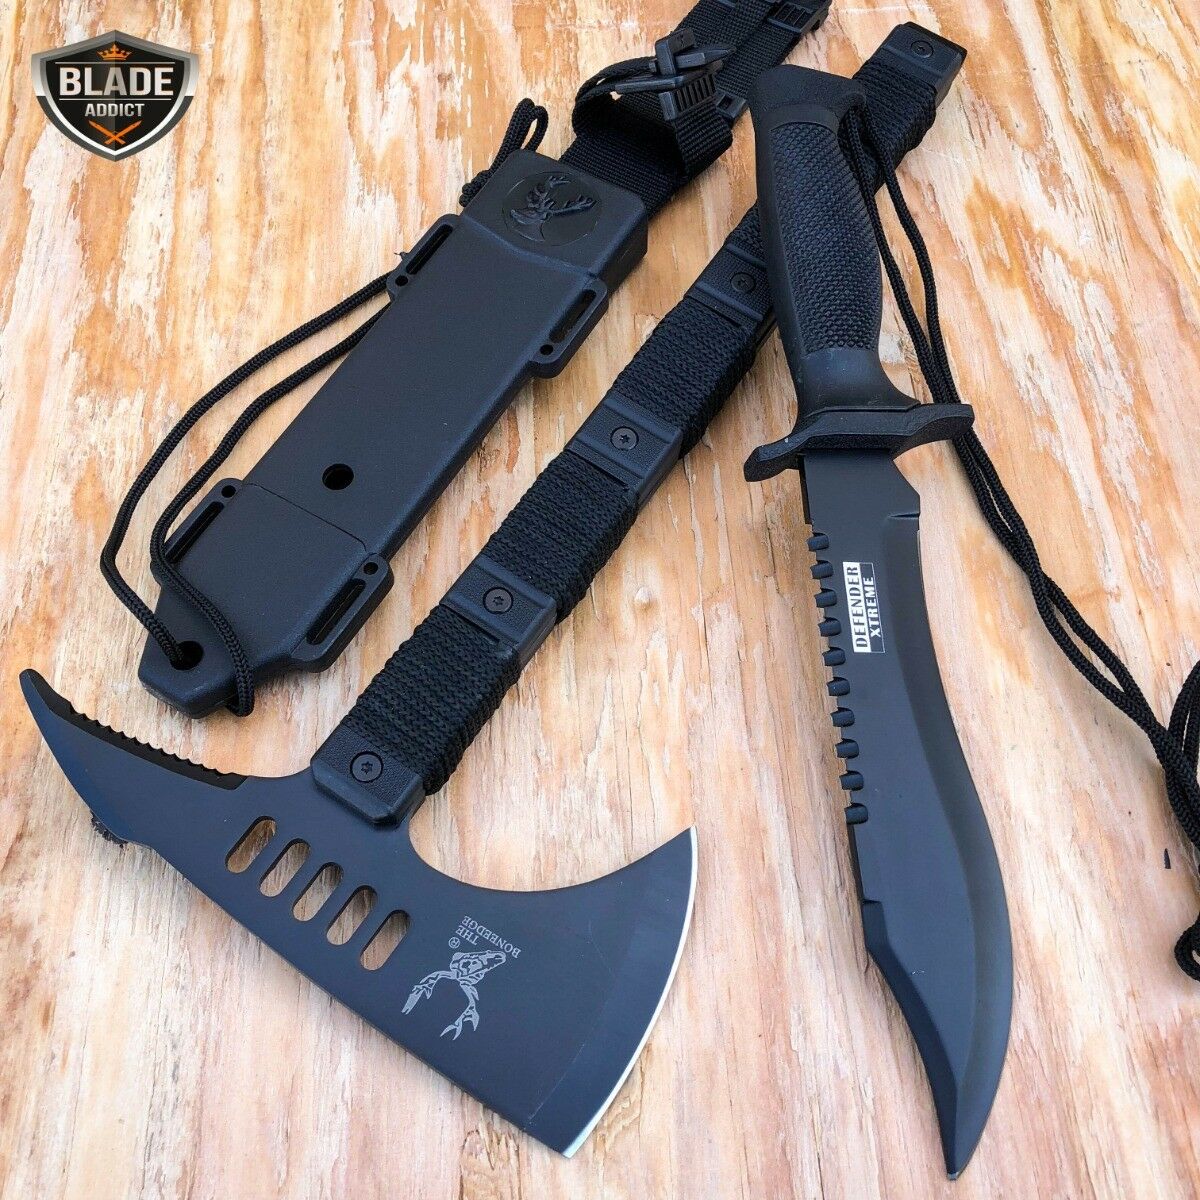 Camping Survival Knife Set with Axe Hatchet